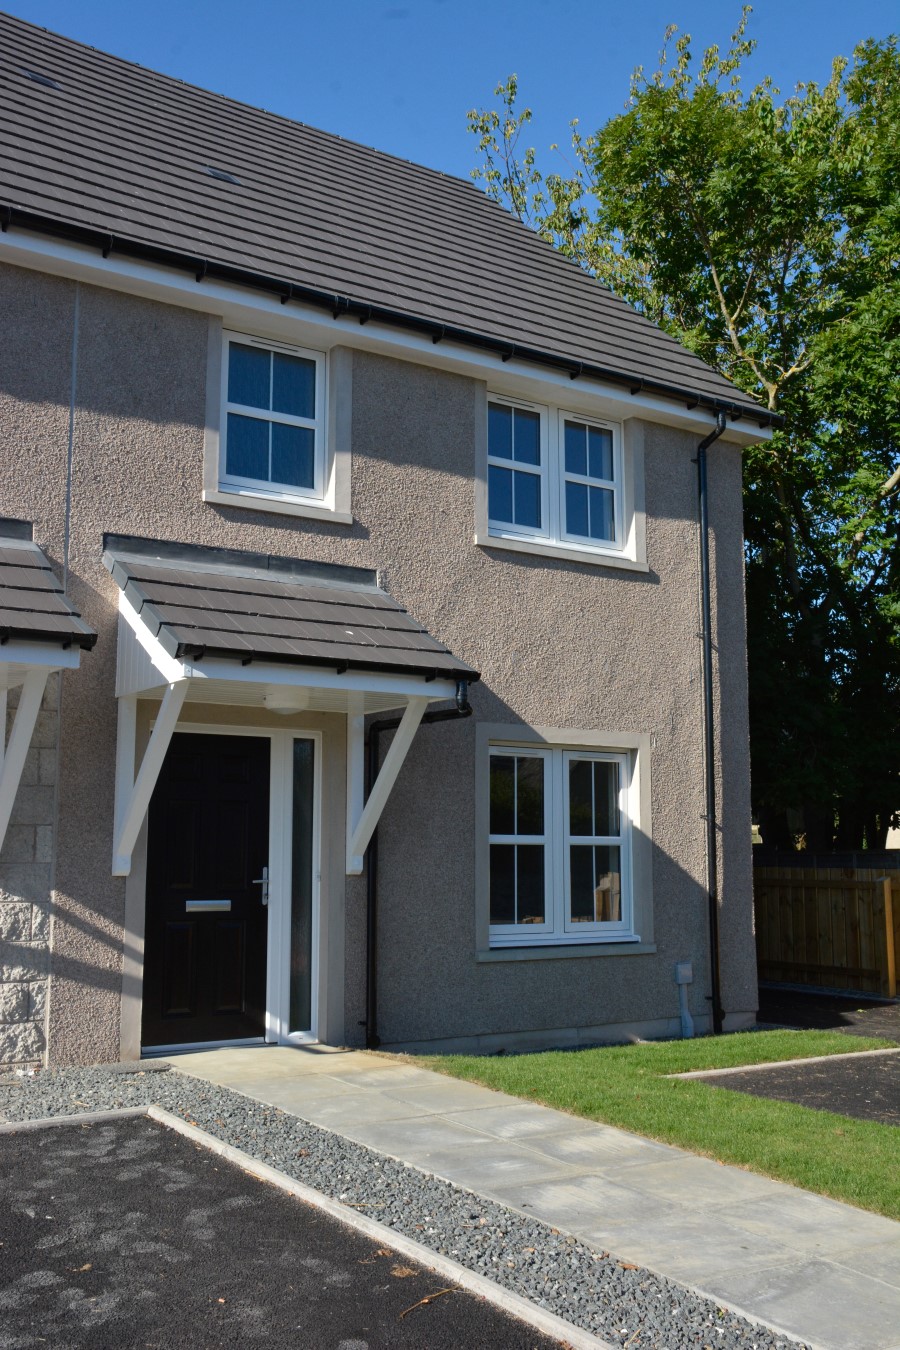 New affordable homes completed at Insch village